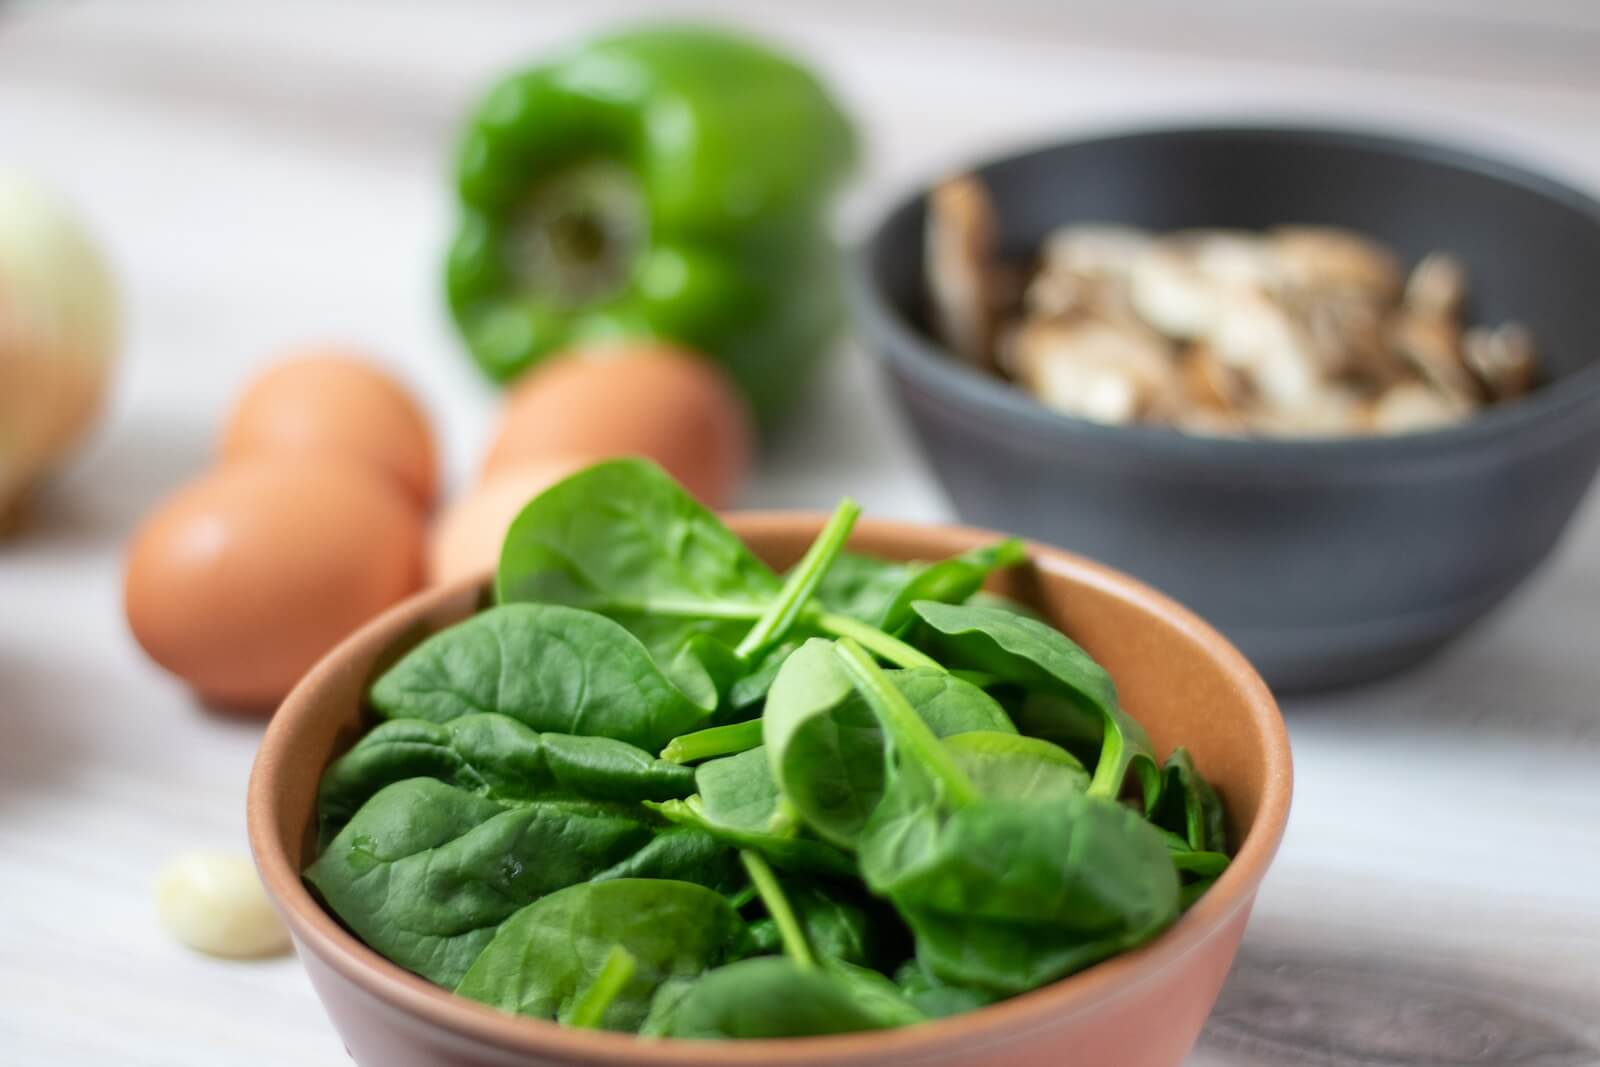 Bowl of spinach in front of other ingredients